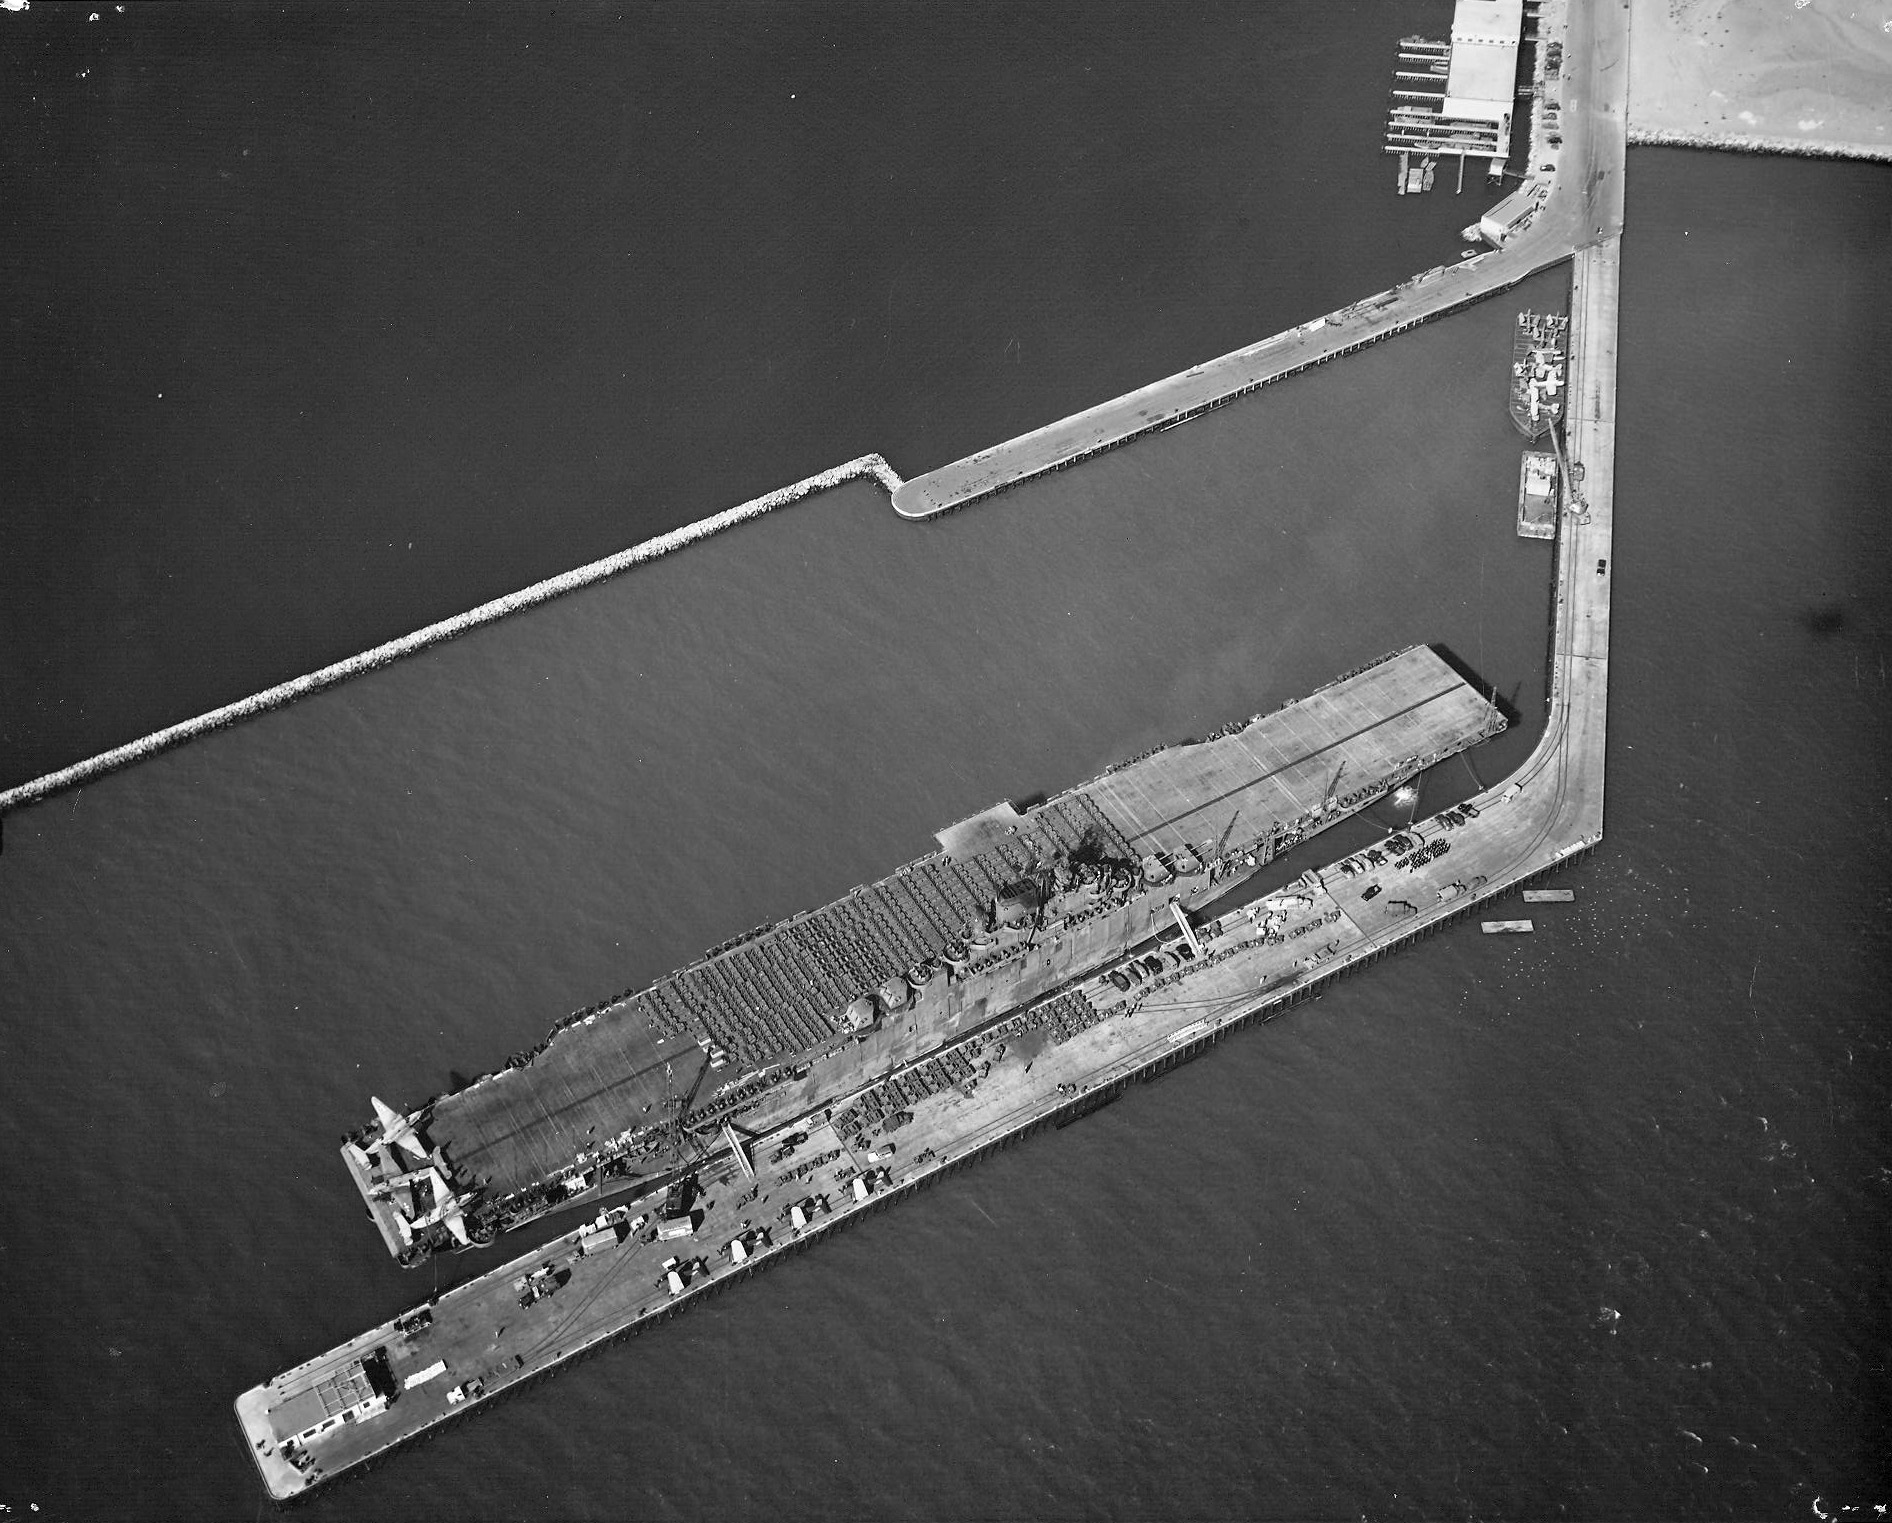 USS Yorktown (Essex-class) at the Alameda Naval Air Station loading aircraft and vehicles for transportation to the Pacific, 14 Sep 1943. Note three PV-1 Venturas on the after flight deck. Photo 2 of 2.